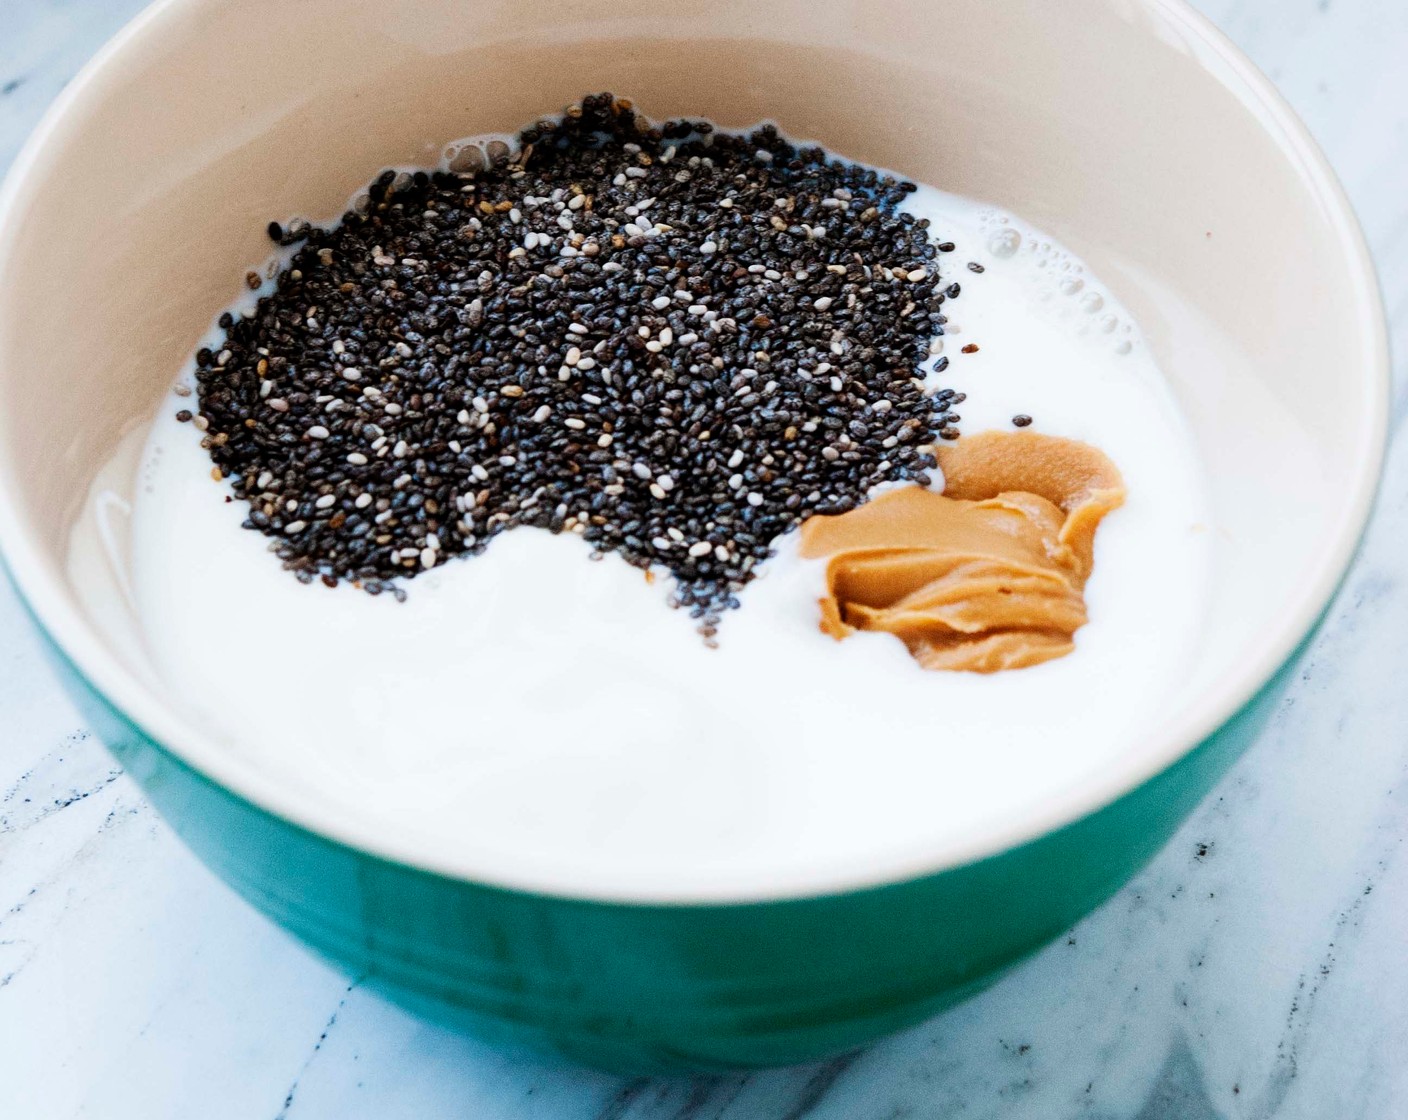 step 1 Place the Greek Yogurt (1/2 cup), Whole Milk (1/4 cup), Chia Seeds (1 Tbsp), and Creamy Peanut Butter (1 Tbsp) together into a large bowl and whisk until they are well combined. If it’s cold, it might take some time for the peanut butter to stir into the milk and yogurt.